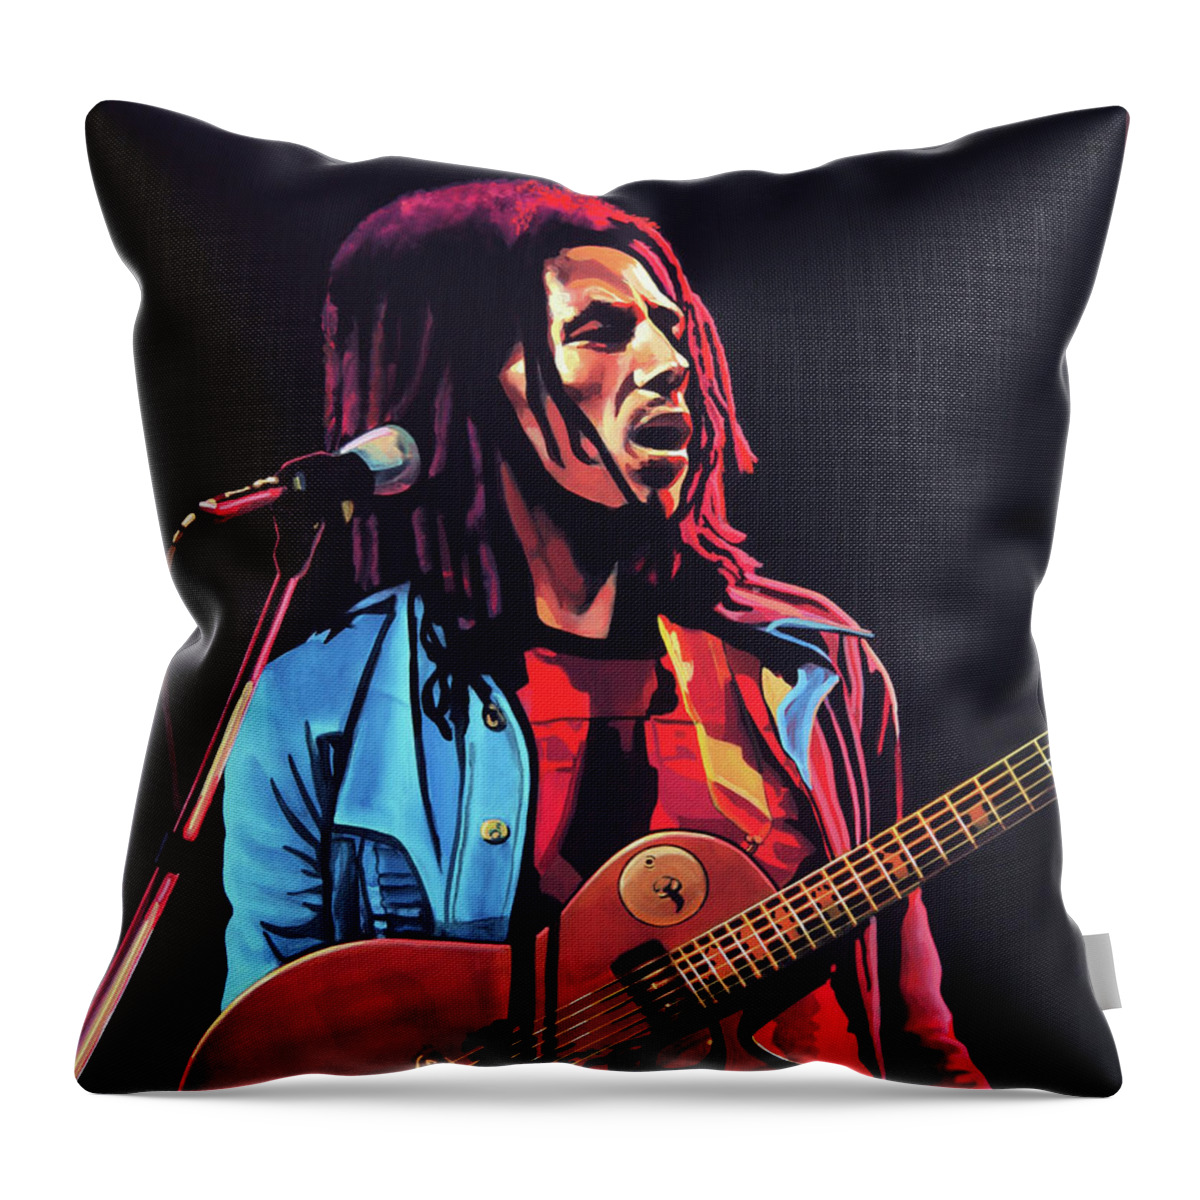 Bob Marley Throw Pillow featuring the painting Bob Marley Tuff Gong Painting #1 by Paul Meijering